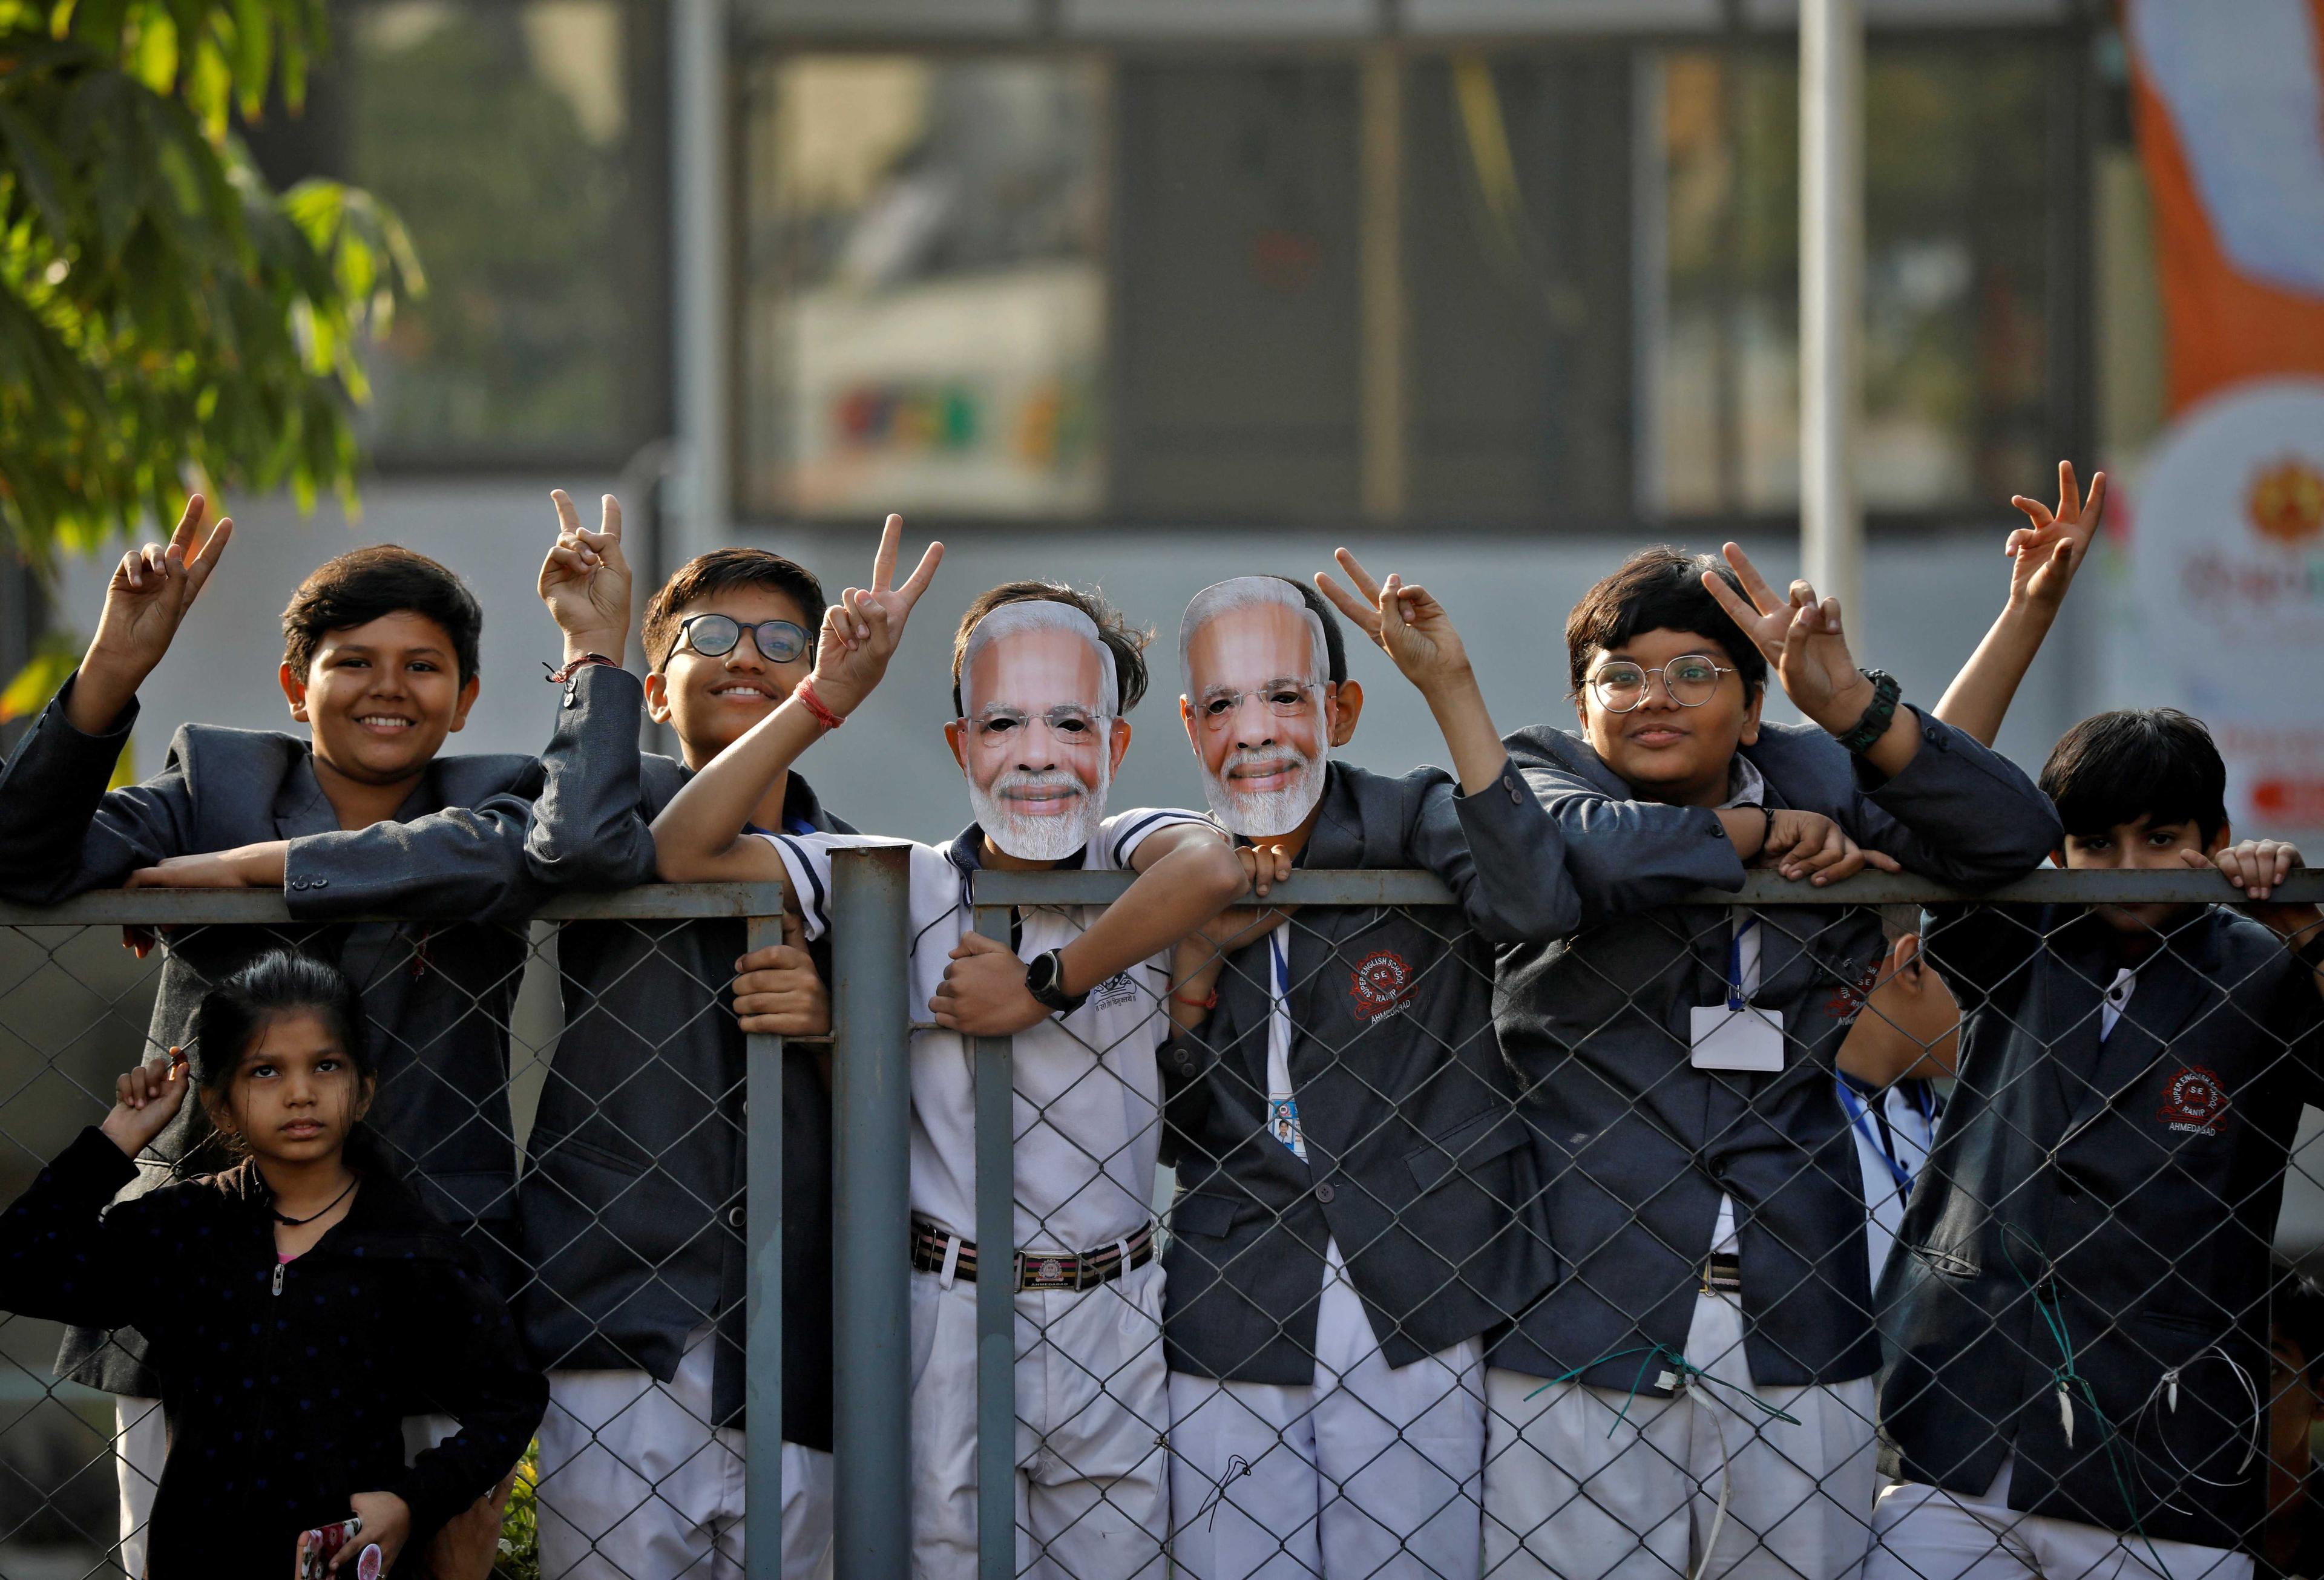 School children gesture towards India's Prime Minister Narendra Modi as he arrives to cast his vote during the second and last phase of Gujarat state assembly elections in Ahmedabad, India, Dec 5. Photo: Reuters